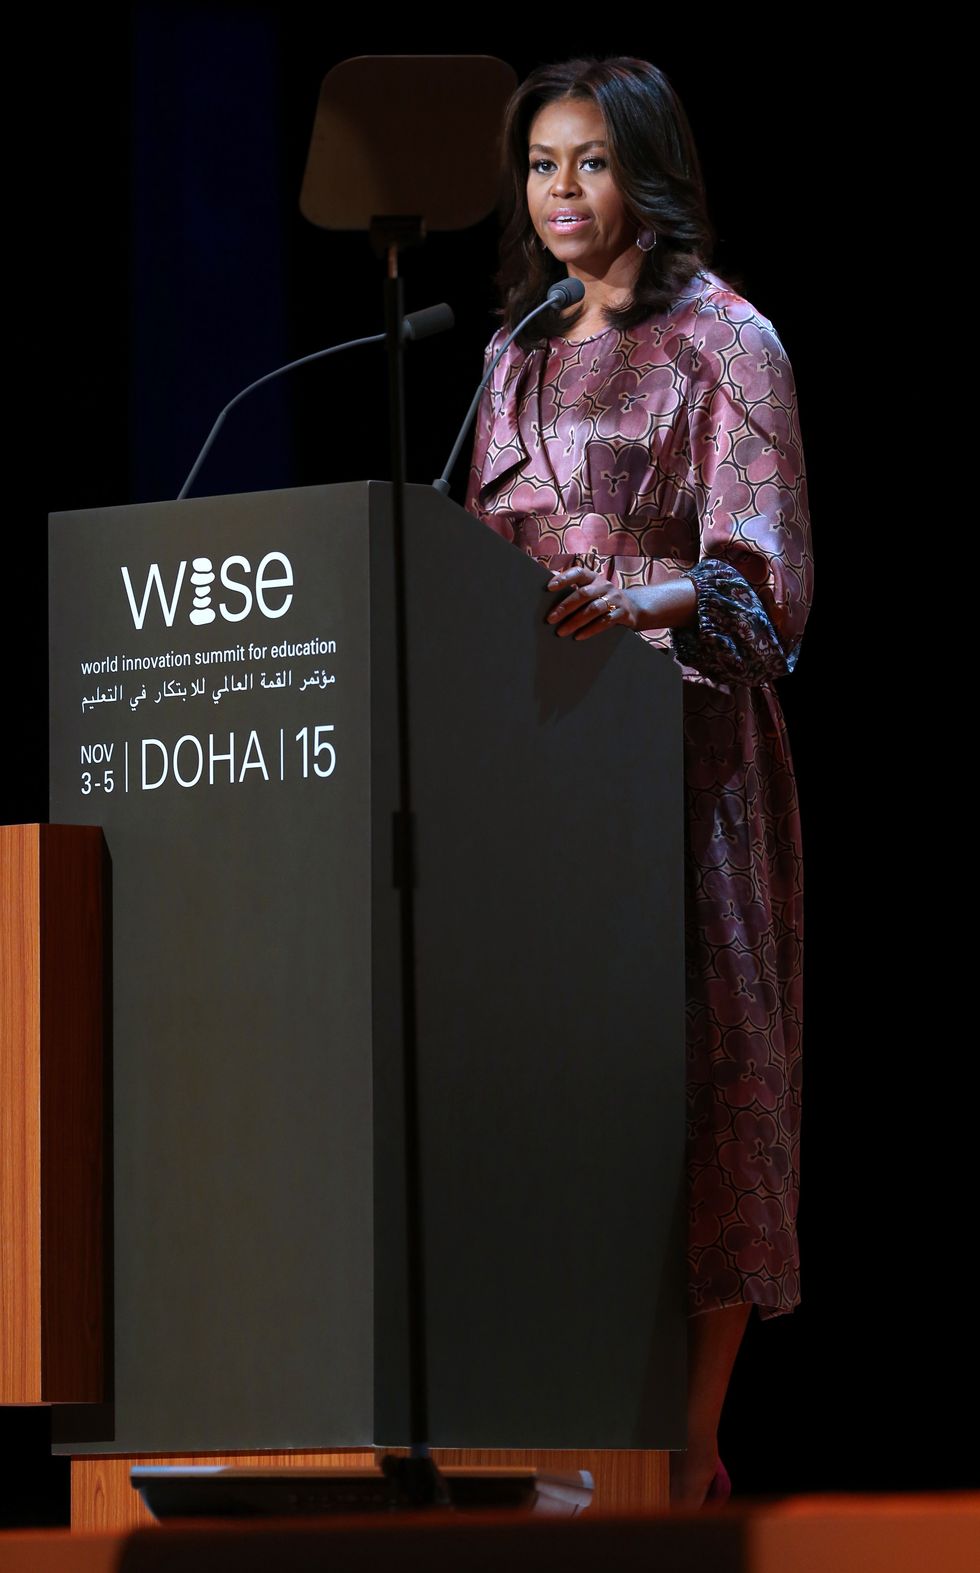 us first lady michelle obama delivers a speech during the world innovation summit for education wise held the convention center in the qatari capital doha on november 4, 2015 the us first lady, on a seven day tour of the middle east, told the education conference that an honest conversation was needed around the globe about how women were treated and how this prevented millions of girls from finishing school afp photo  faisal al tamimi photo credit should read faisal al tamimiafp via getty images